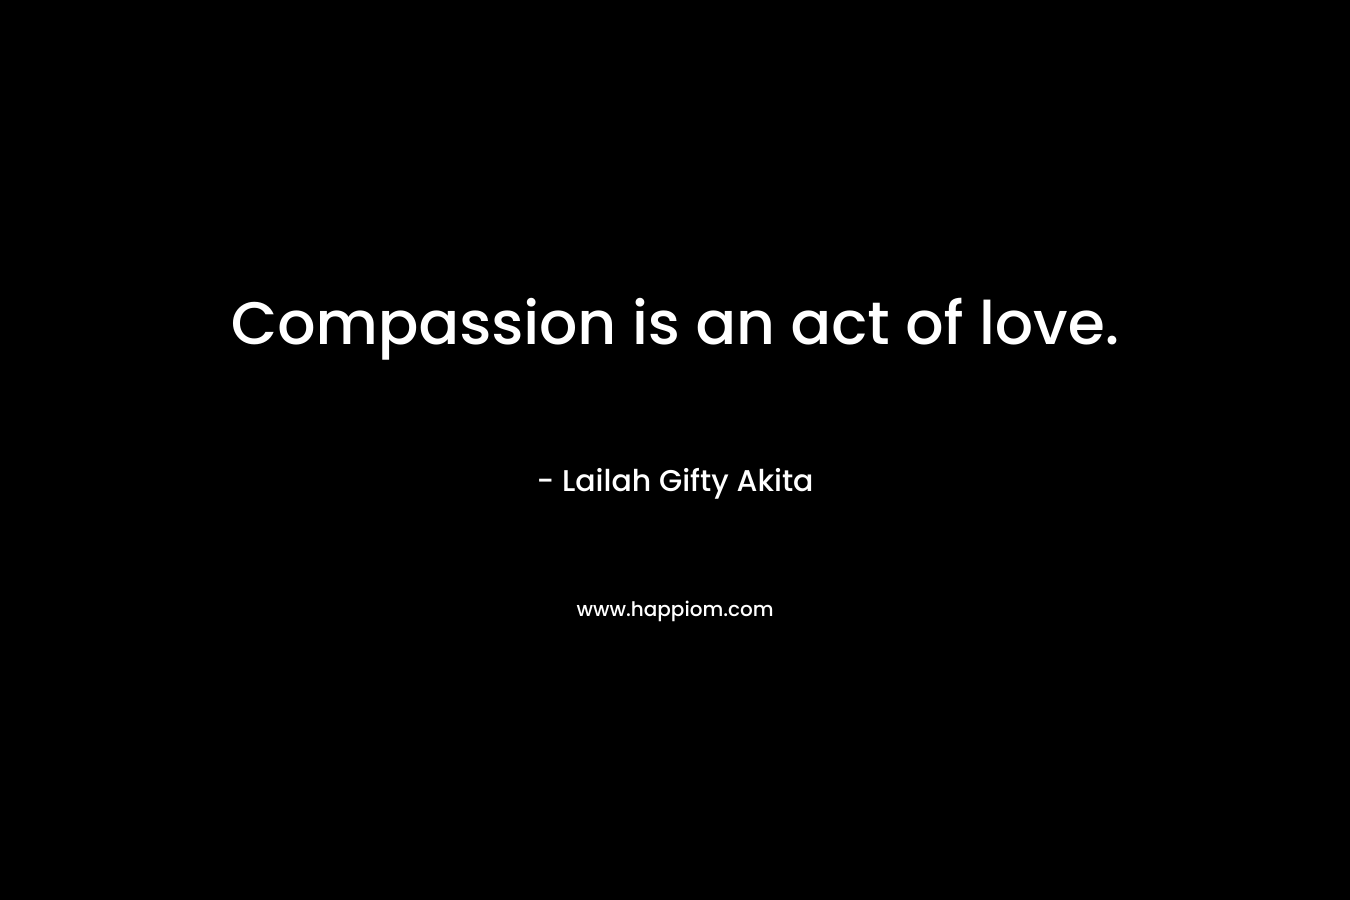 Compassion is an act of love.